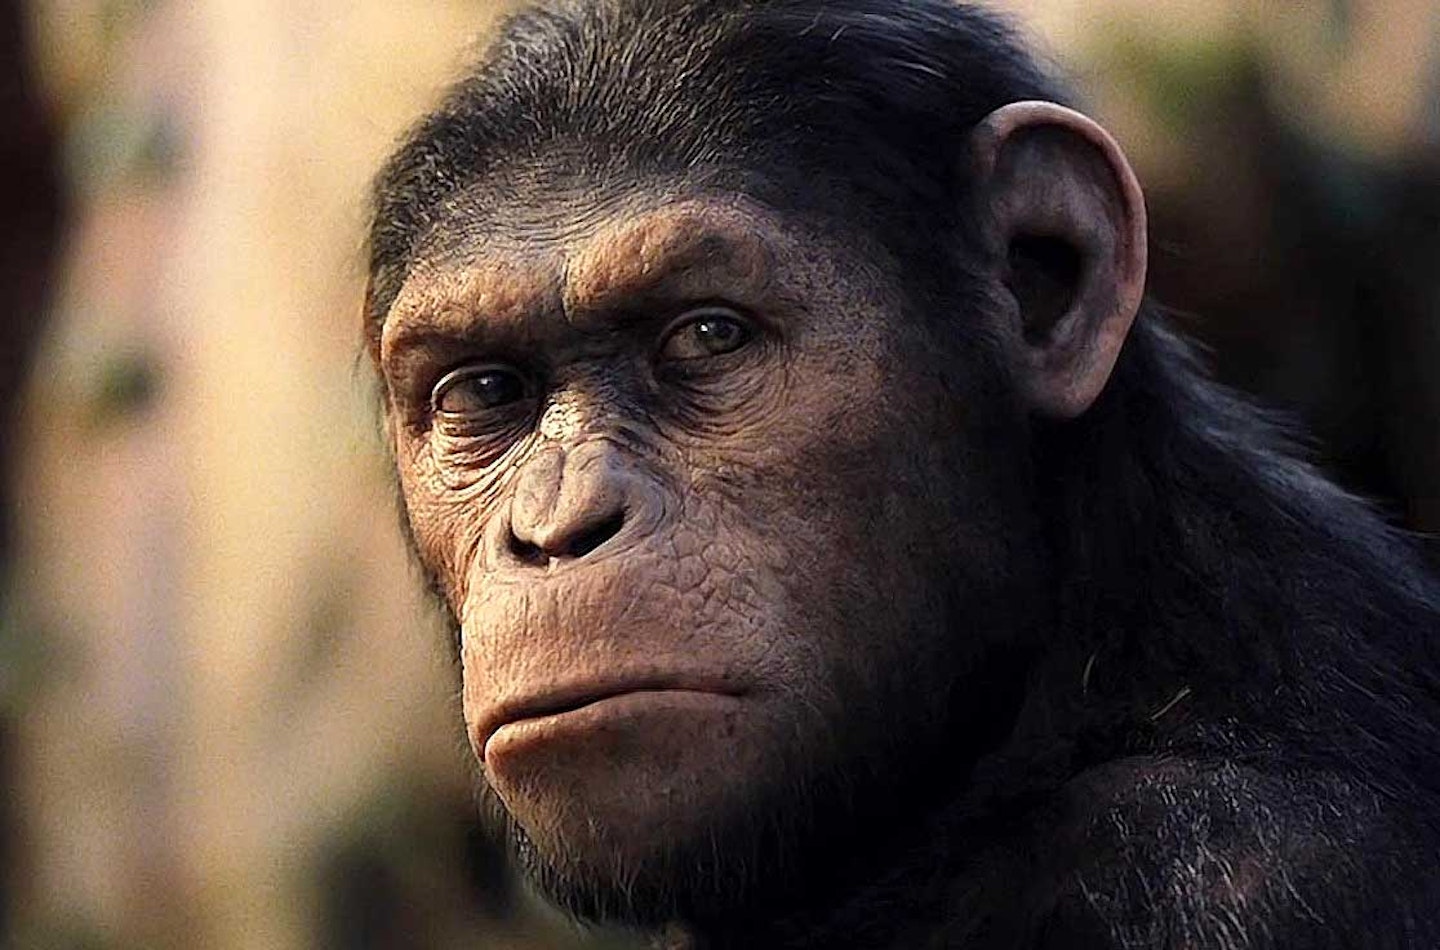 Matt Reeves Talks Dawn Of The Planet Of The Apes